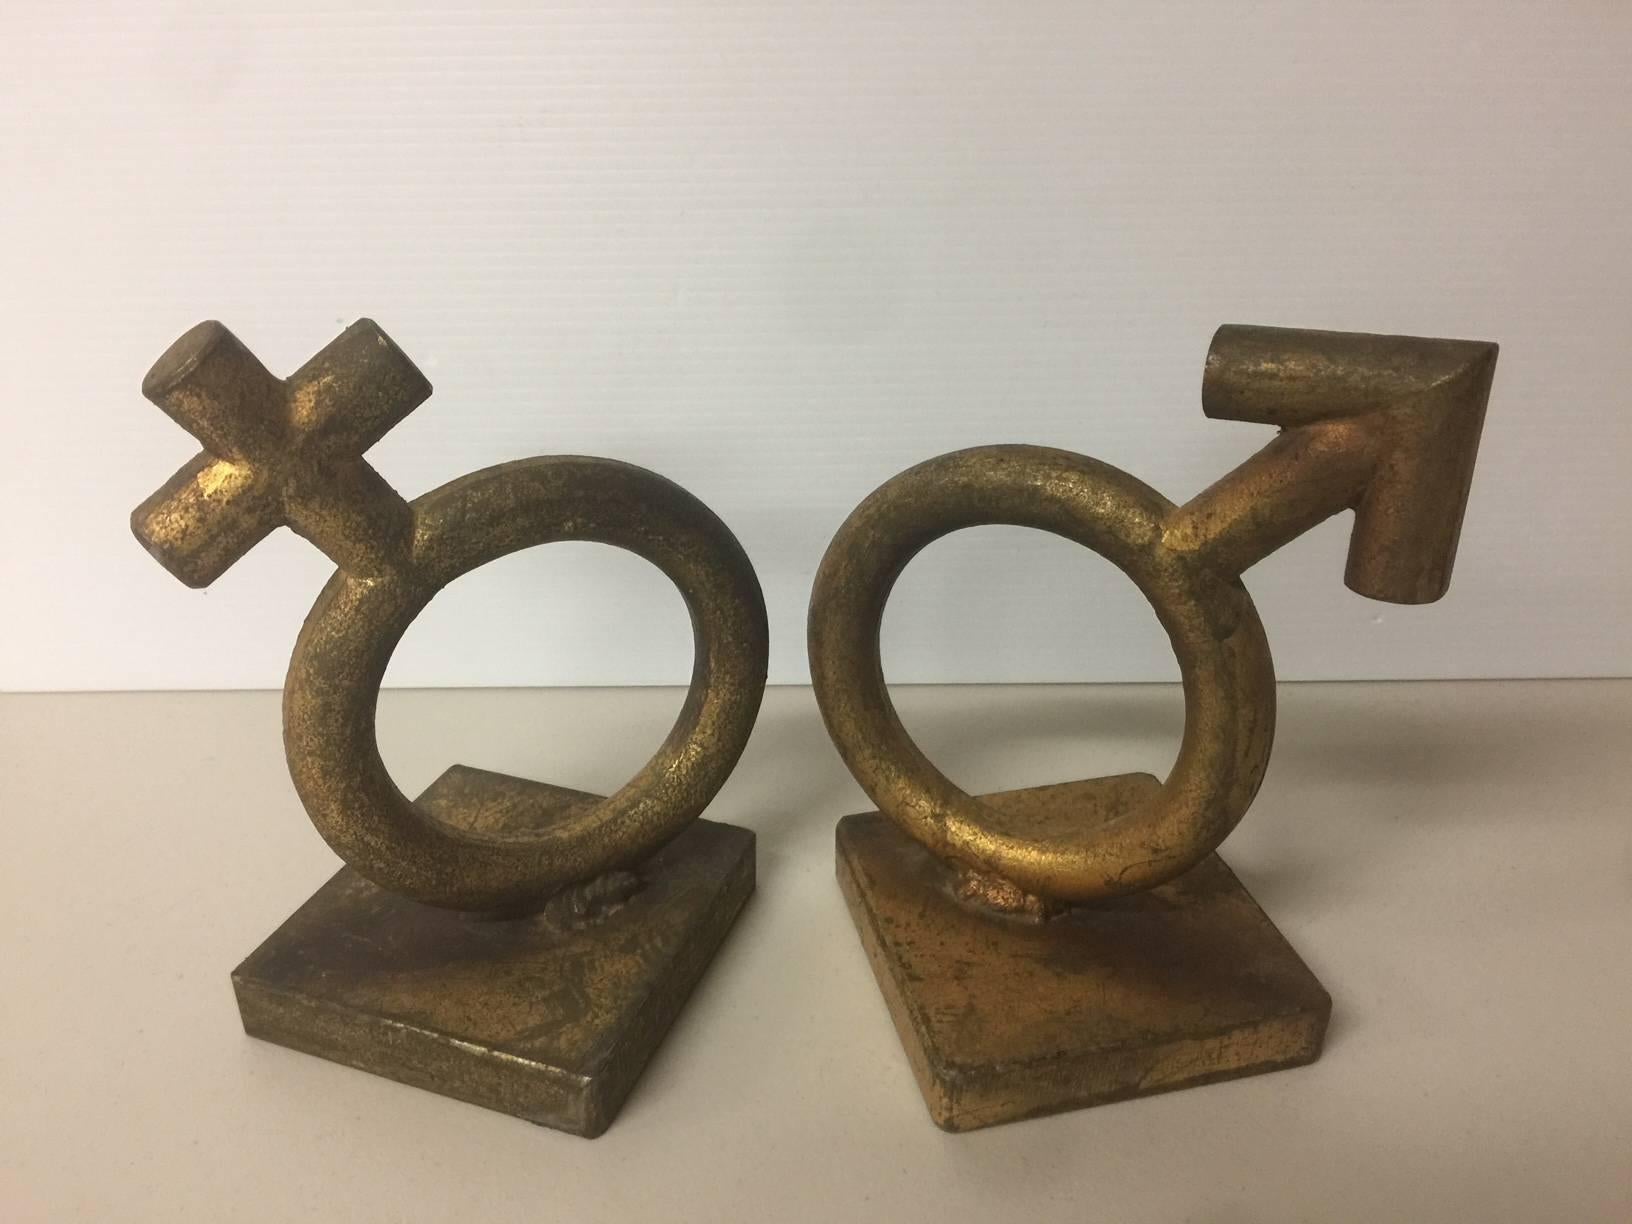 Iconic Midcentury Gender Symbol / Sex Bookends by C. Jere For Sale 1